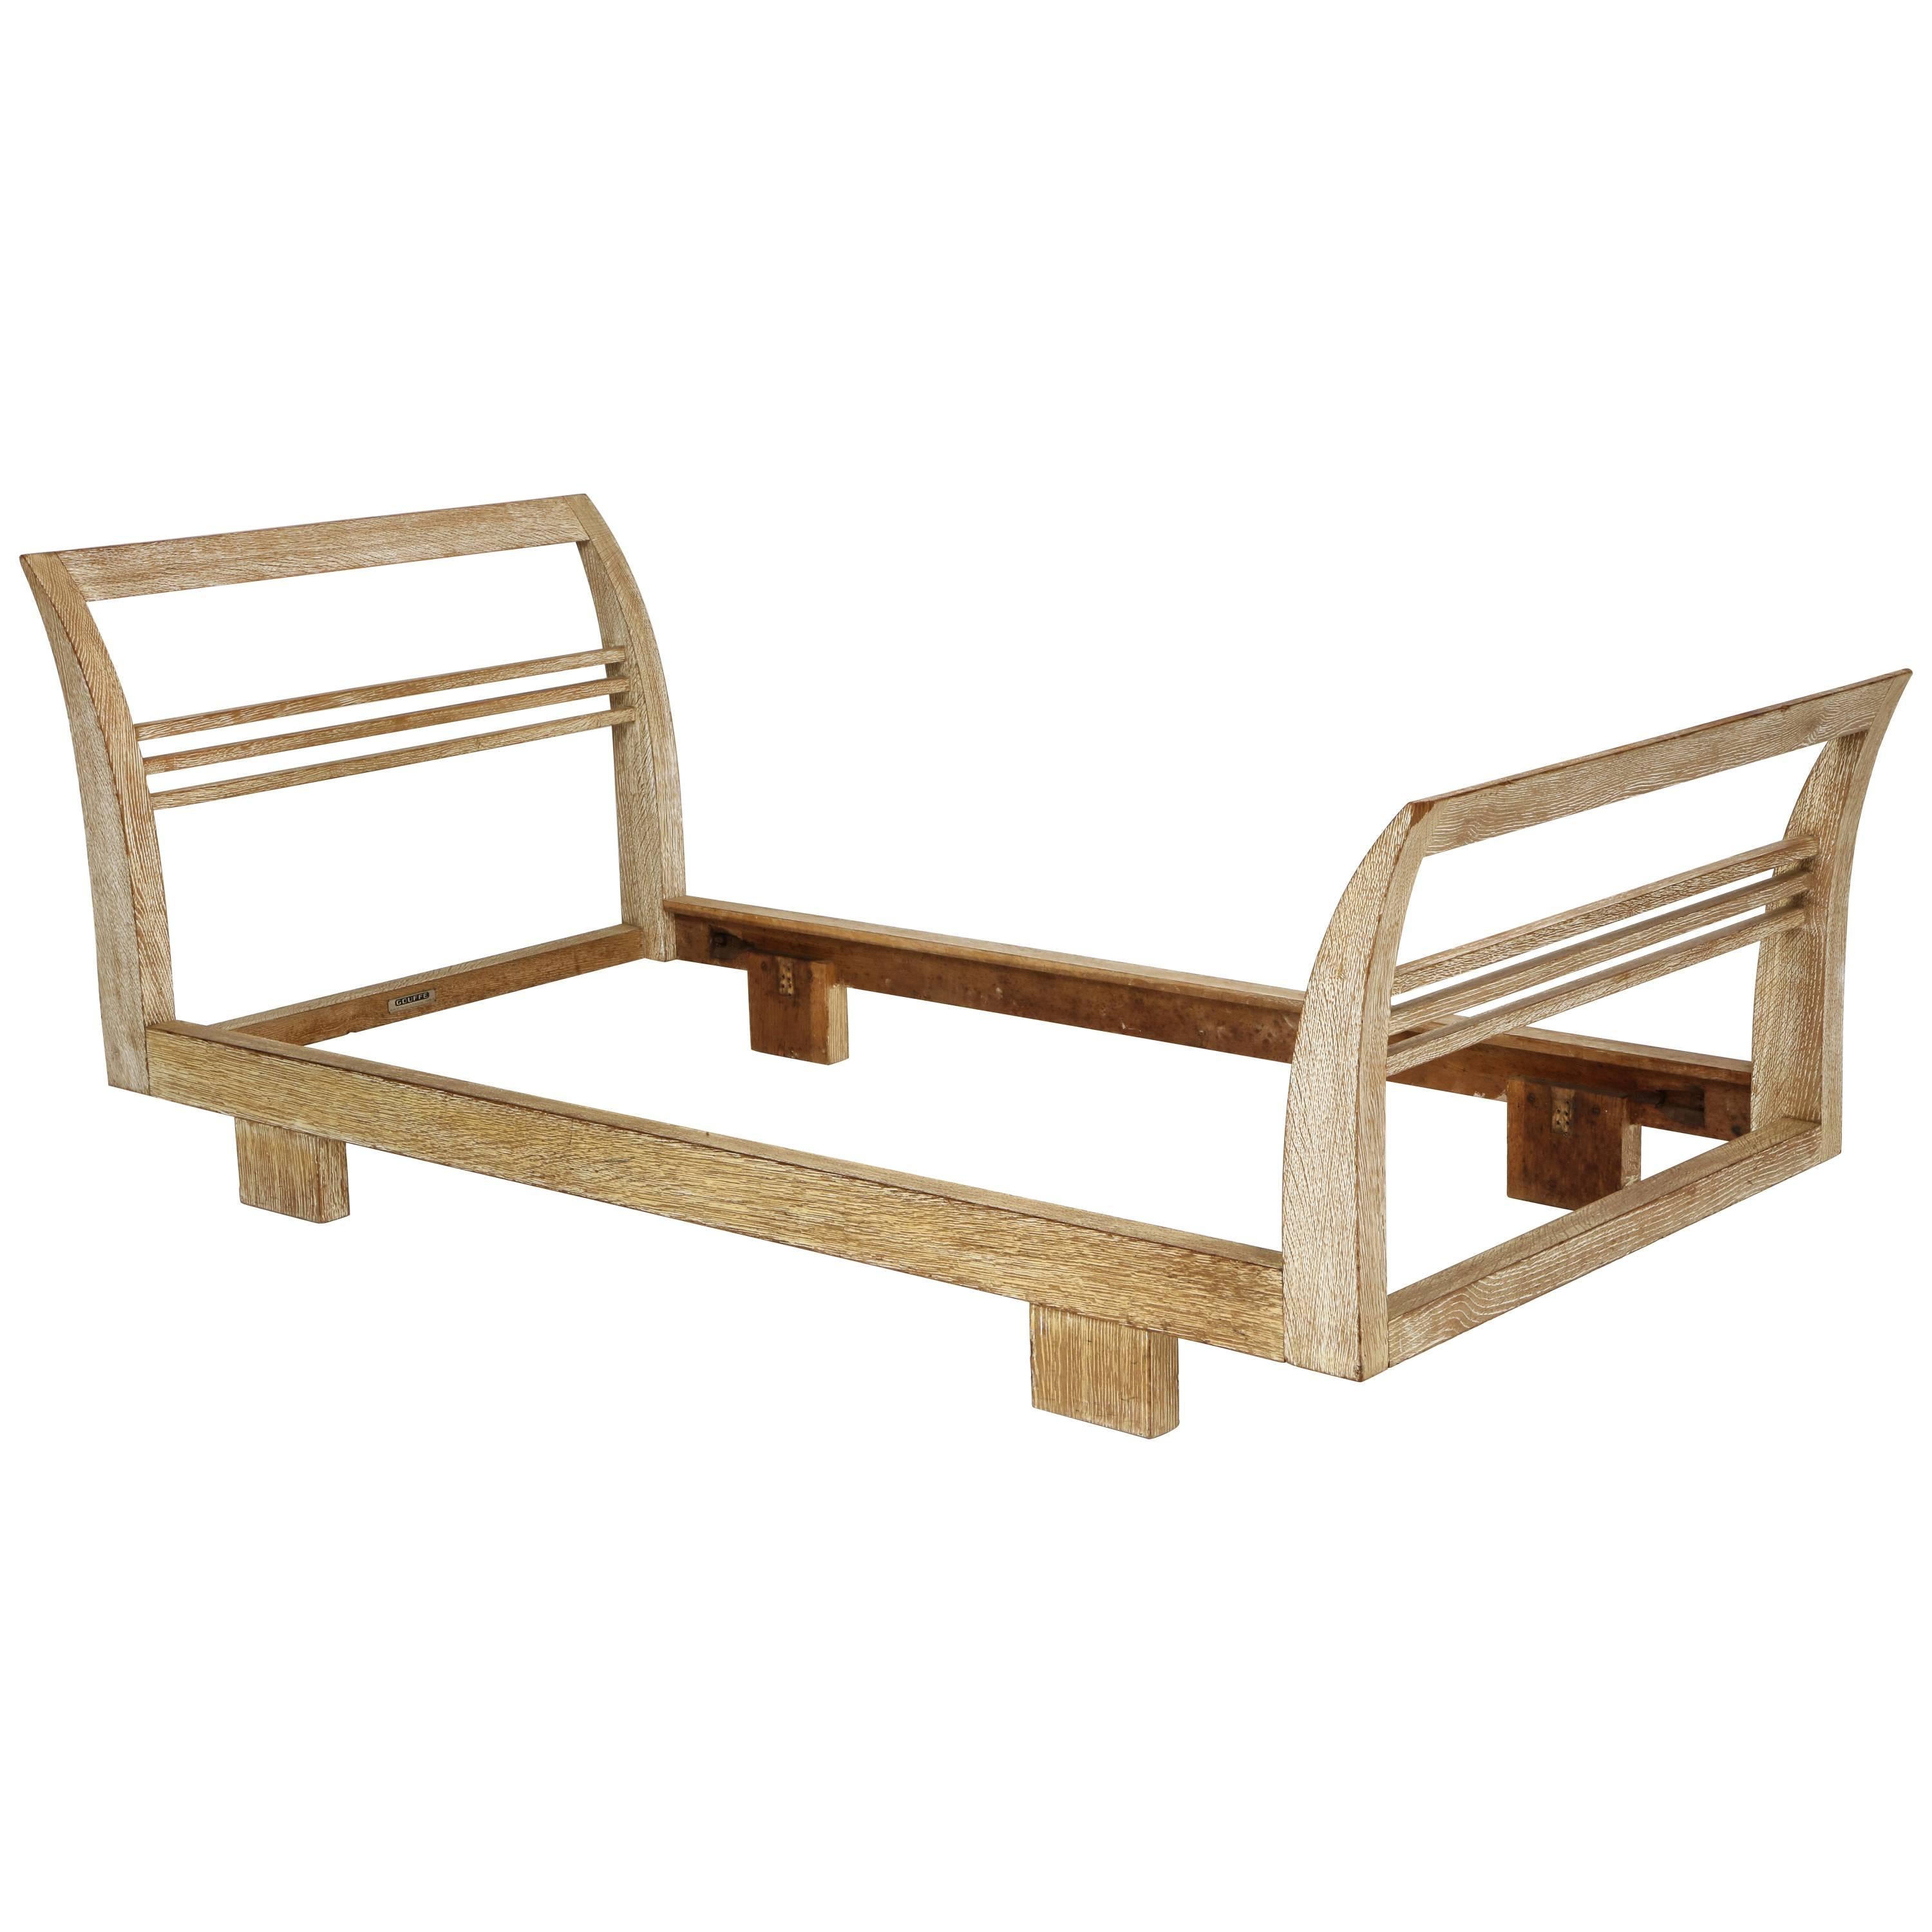 Royere Gouffe cerused oak daybed deco, France, 1930s-1940s midcentury

Amazing rare pair of daybeds designed by Royere and made by Maison Gouffe.
In lovely original condition.
Pair available. Price is per item.
Part of a seven-piece